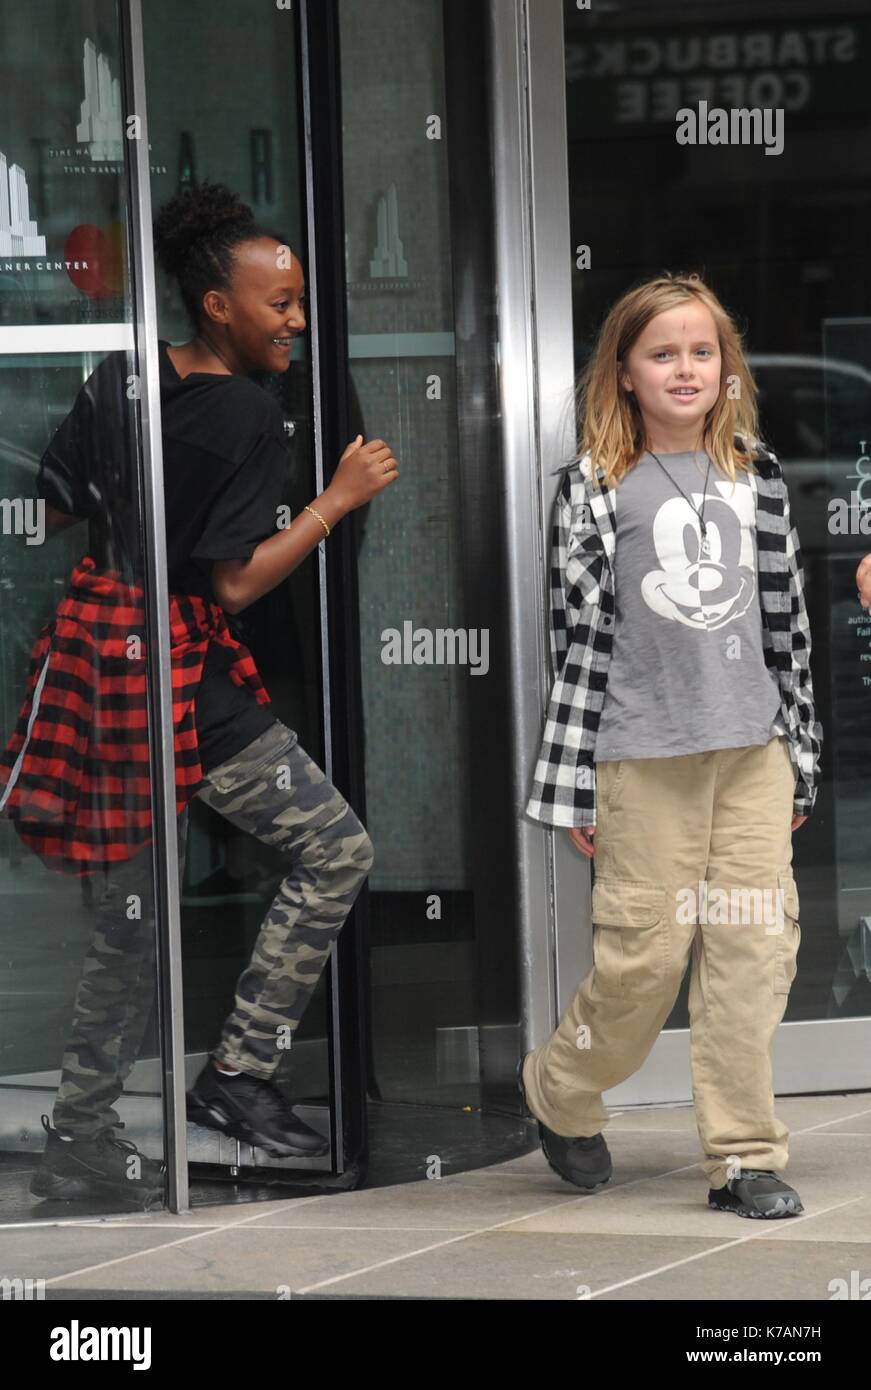 Zahara Jolie Pitt, Vivienne Marcheline Jolie Pitt out and about for Celebrity Candids - THU, , New York, NY September 14, 2017. Photo By: Kristin Callahan/Everett Collection Stock Photo